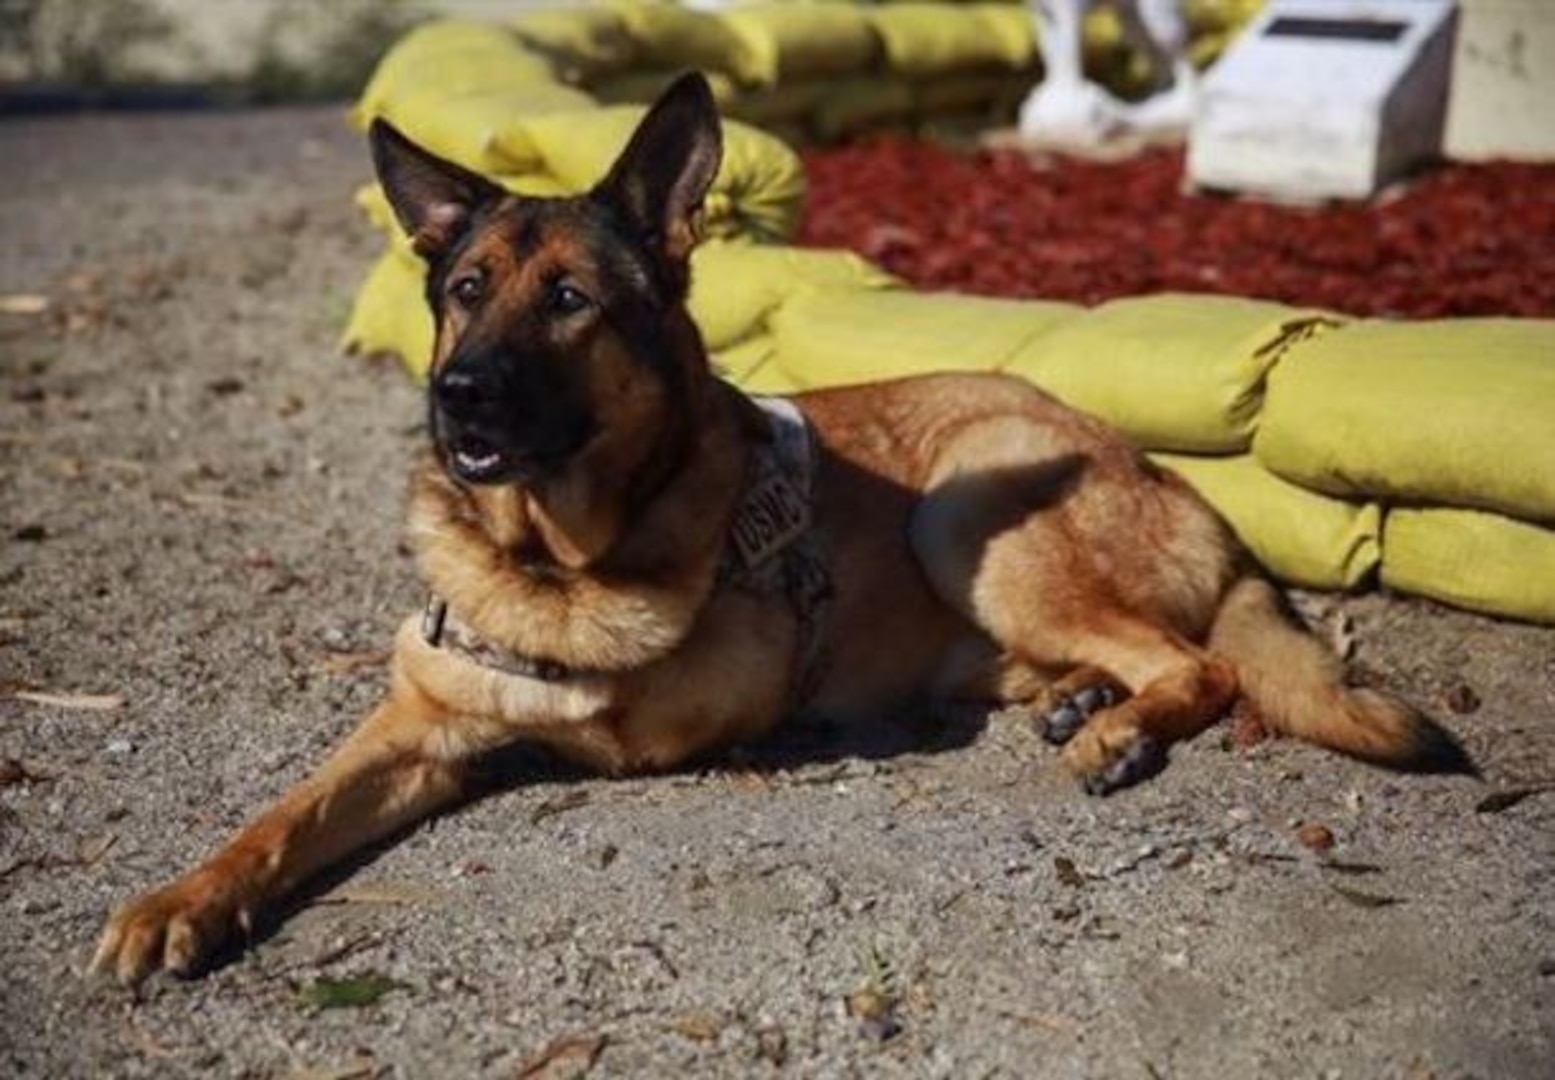 Lucca, a 12-year-old retired Marine Corps military working dog, visits Camp Pendleton Feb. 29, 2016. Lucca has been selected to receive the Dickin Medal, which acknowledges outstanding acts of bravery or devotion to duty by animals serving with the armed forces or civil defense. (U.S. Marine Corps photo by Lance Cpl. Caitlin Bevel) 